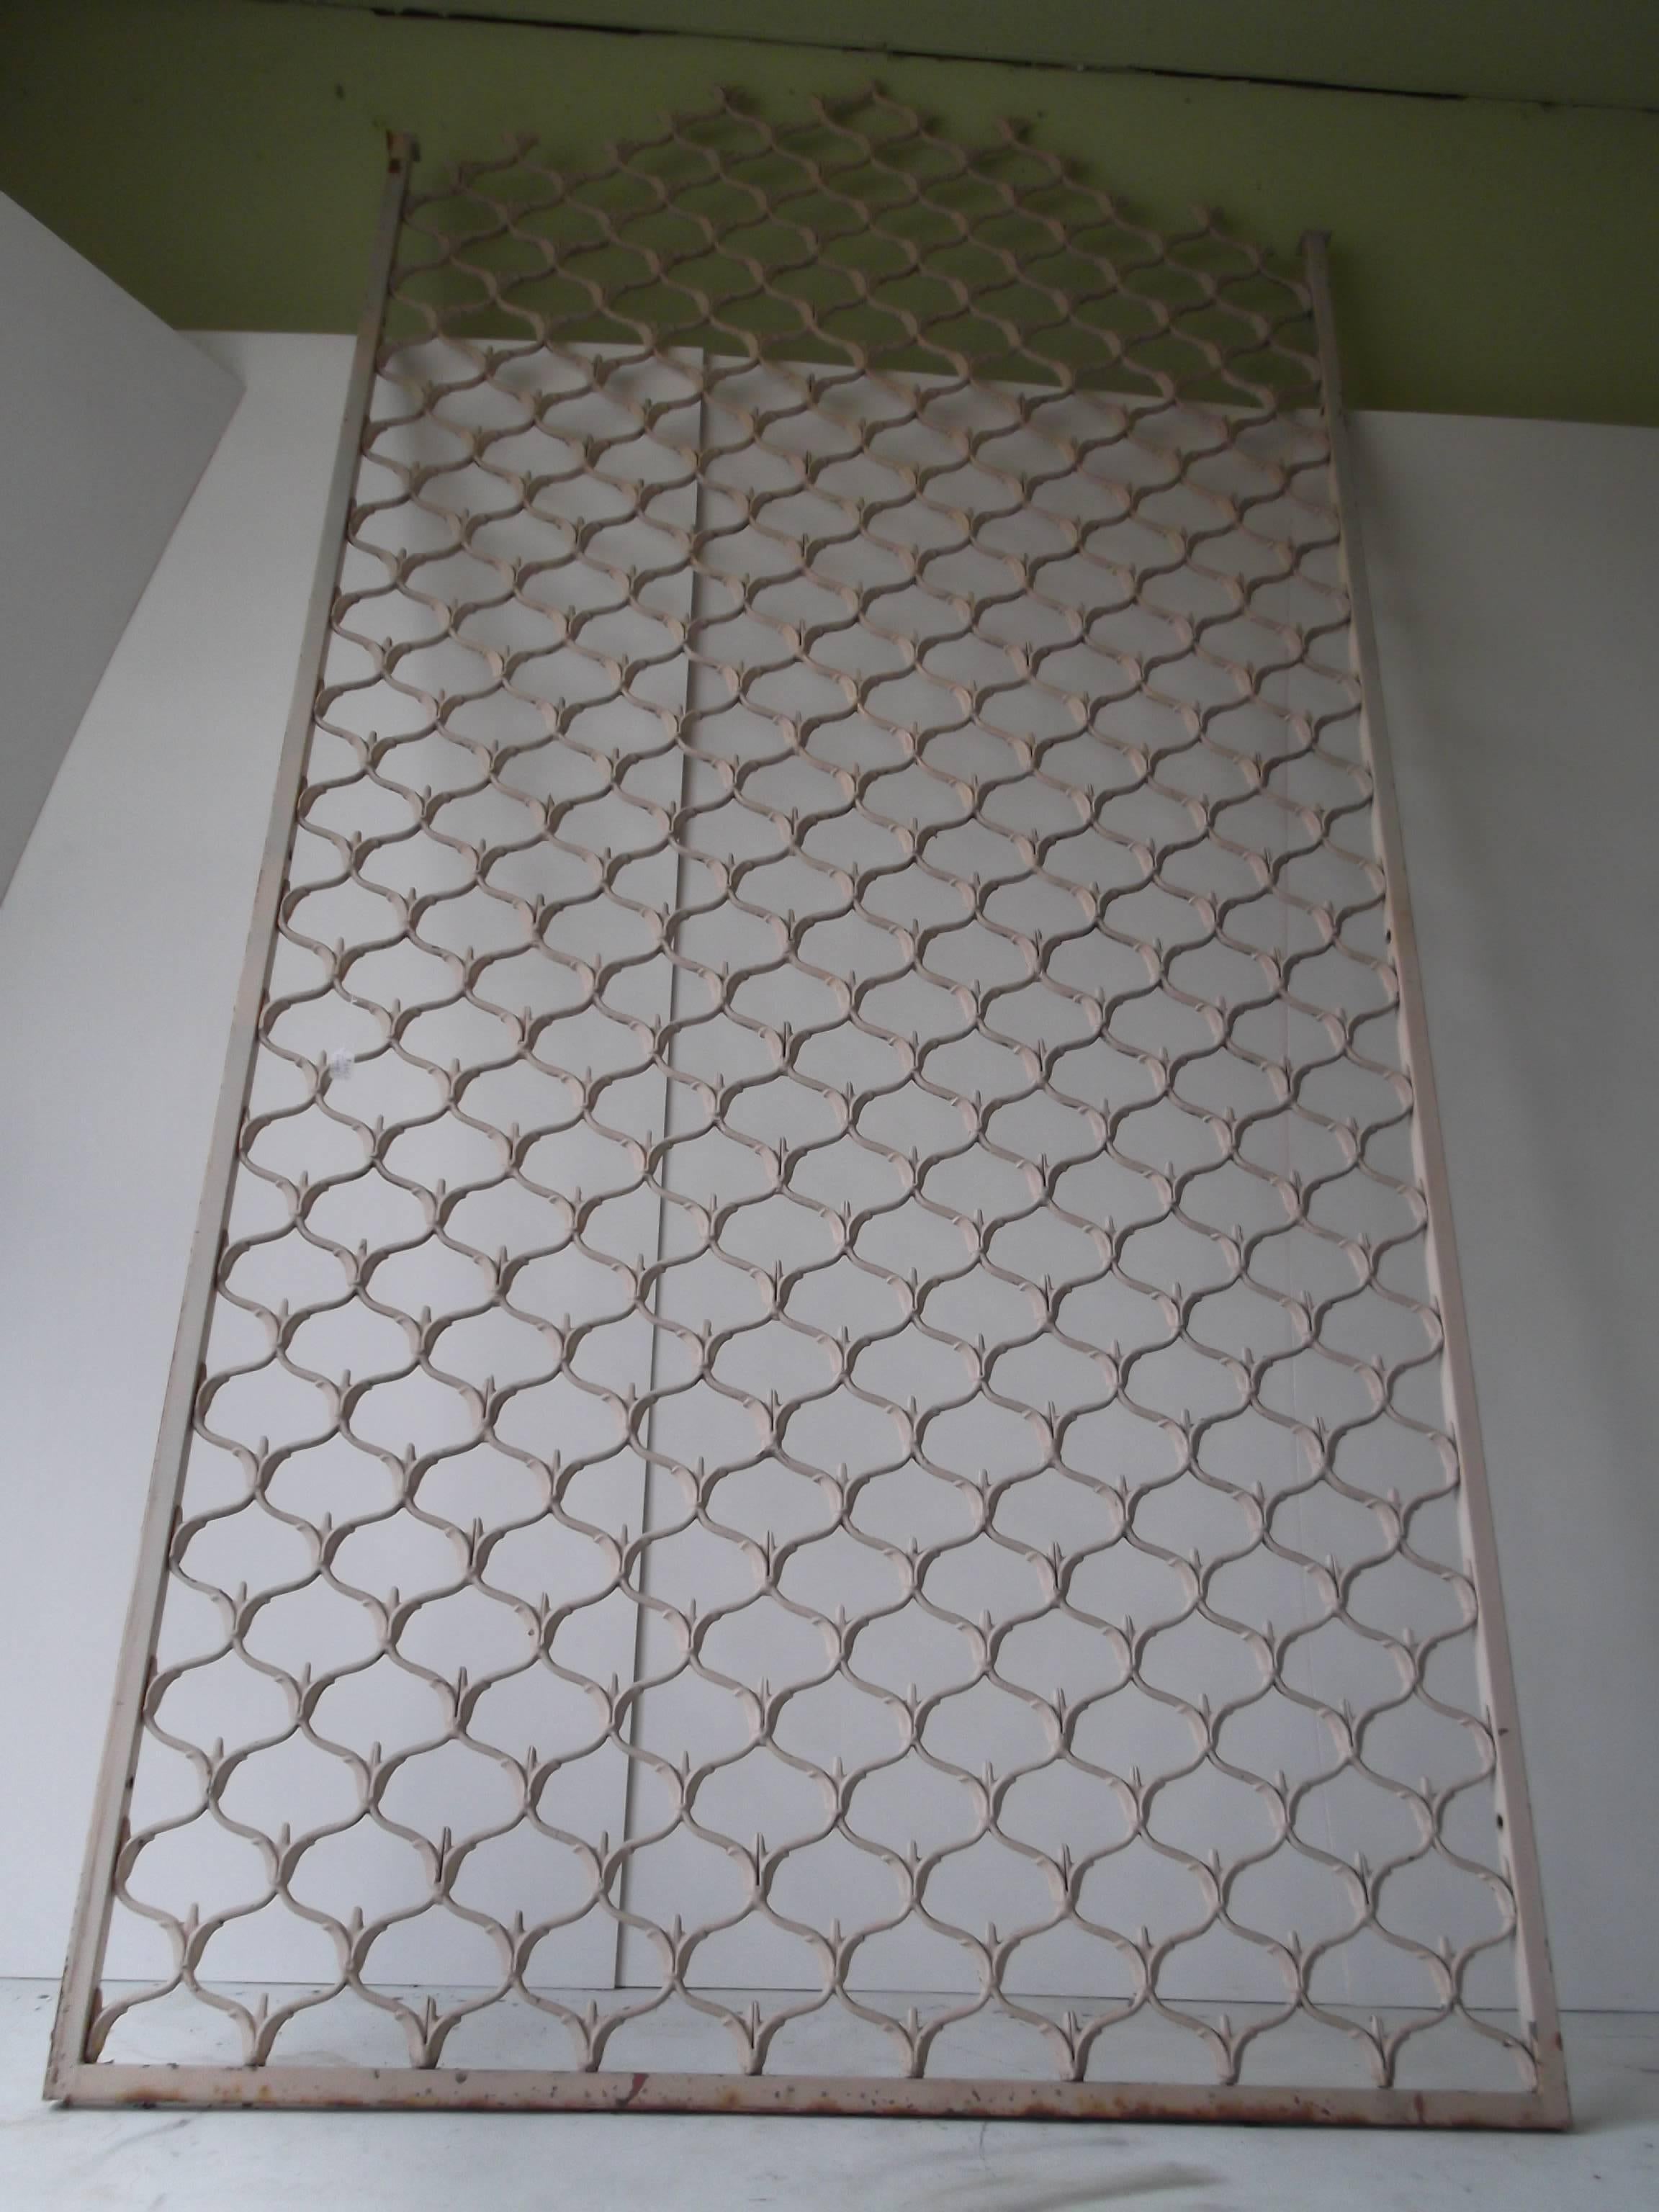 Cast metal grid, from the mid-20th century. It stands 10 feet 3 inches tall. Wow! The possibilities are endless. It would be great as a room divider, garden trellis, giant gate, and one suggested a Headboard for a bed. It has great design pattern to